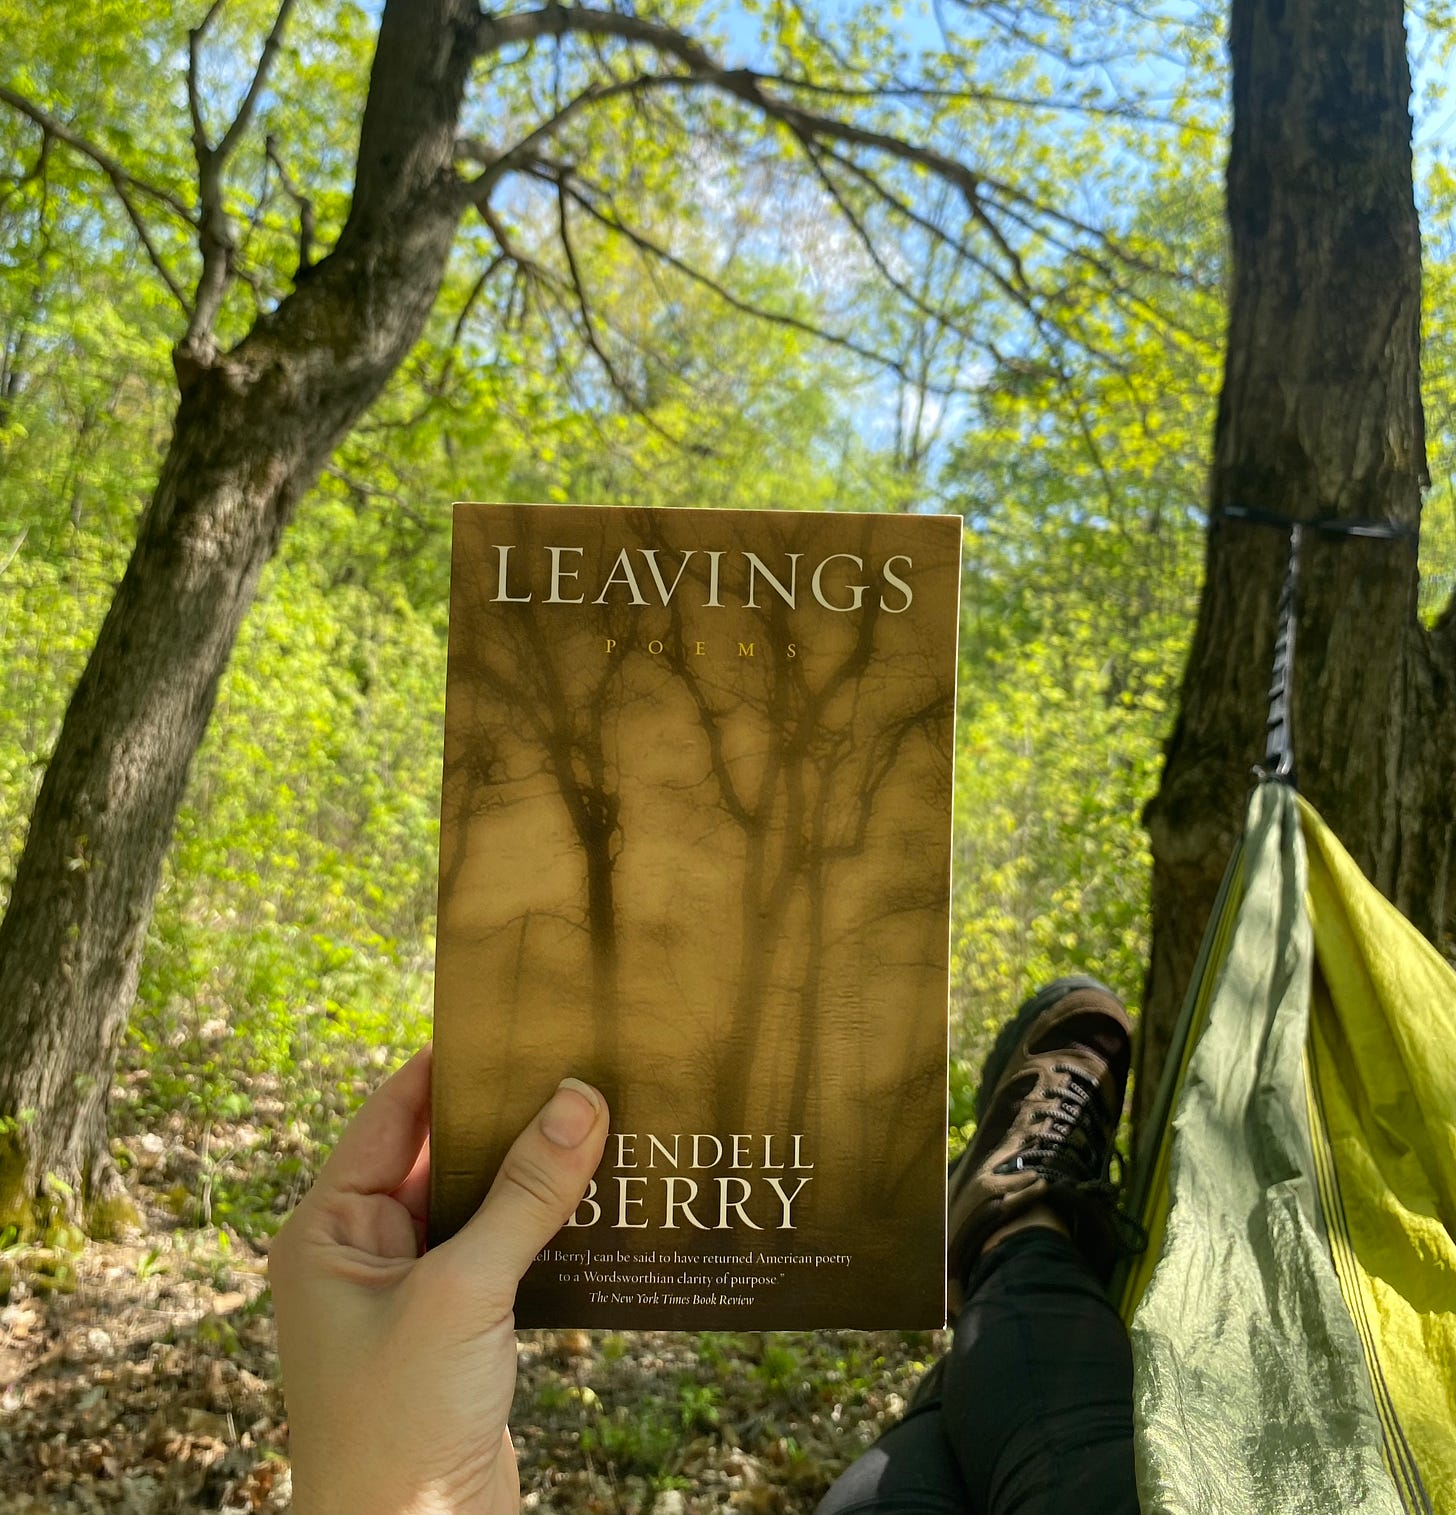 A hand holds out a copy of Leavings by Wendell Berry with its brown cover. This person is in a green hammock with bright green trees behind the book. Their hiking boots can be seen hanging outside the hammock.